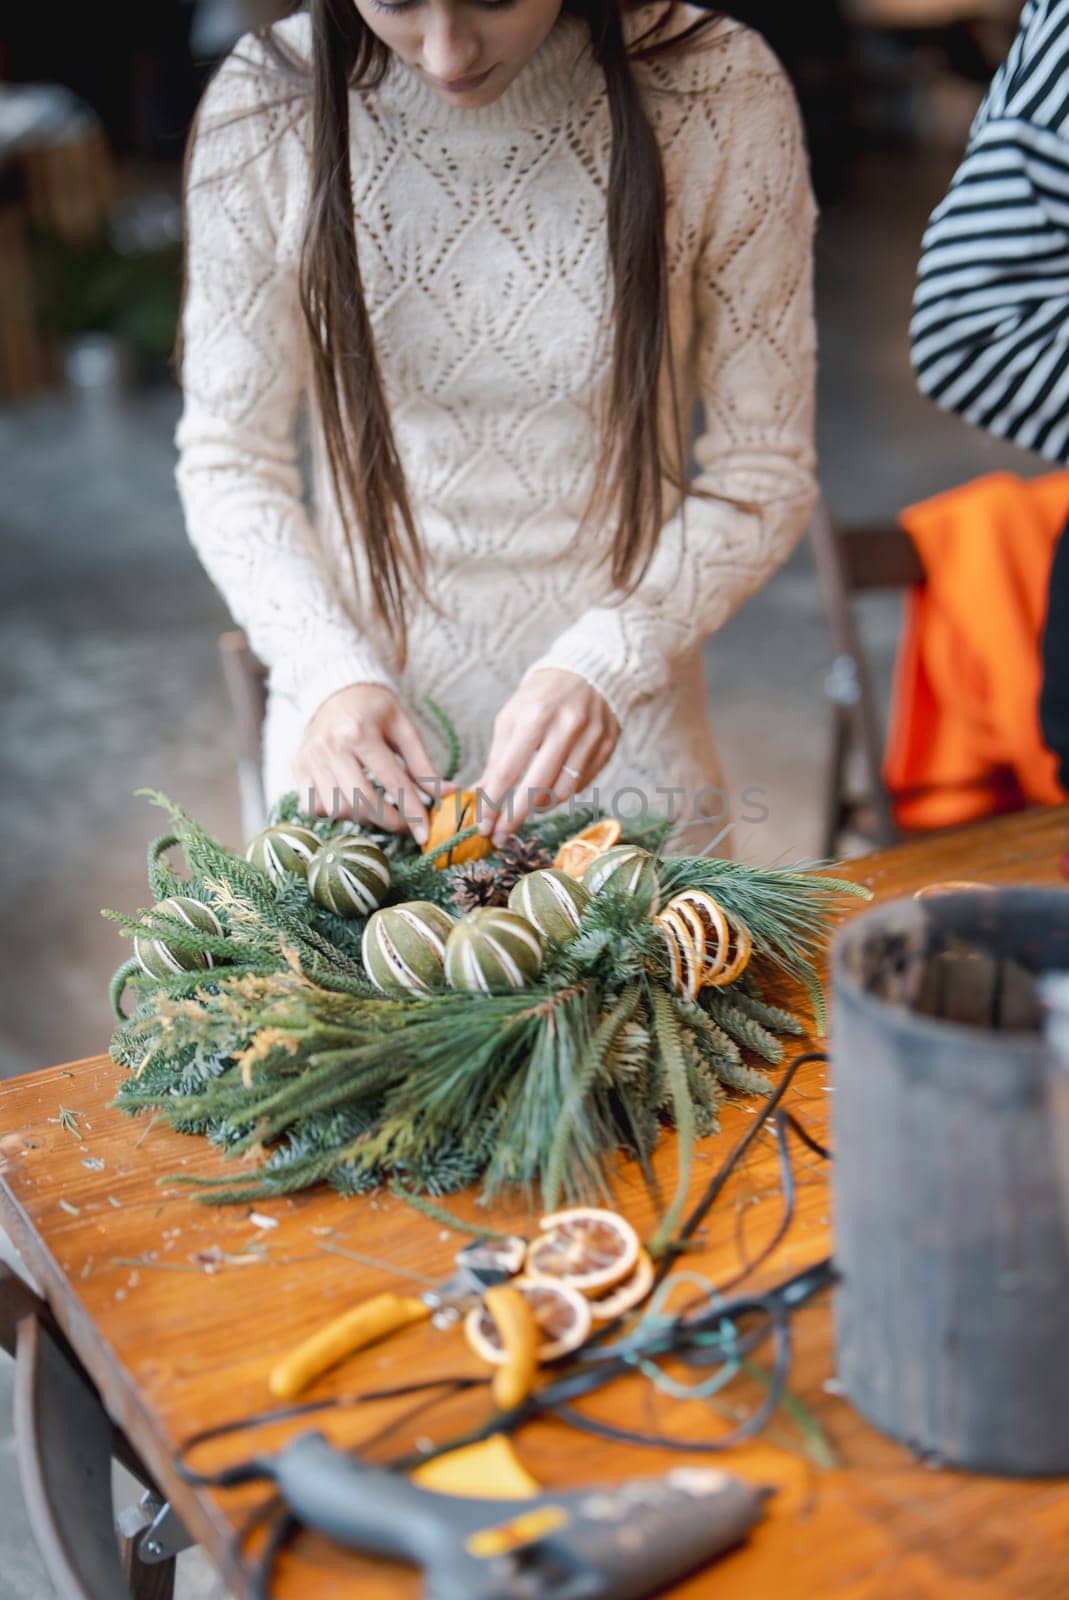 A gorgeous young lady enthusiastically participating in a holiday decoration workshop. by teksomolika